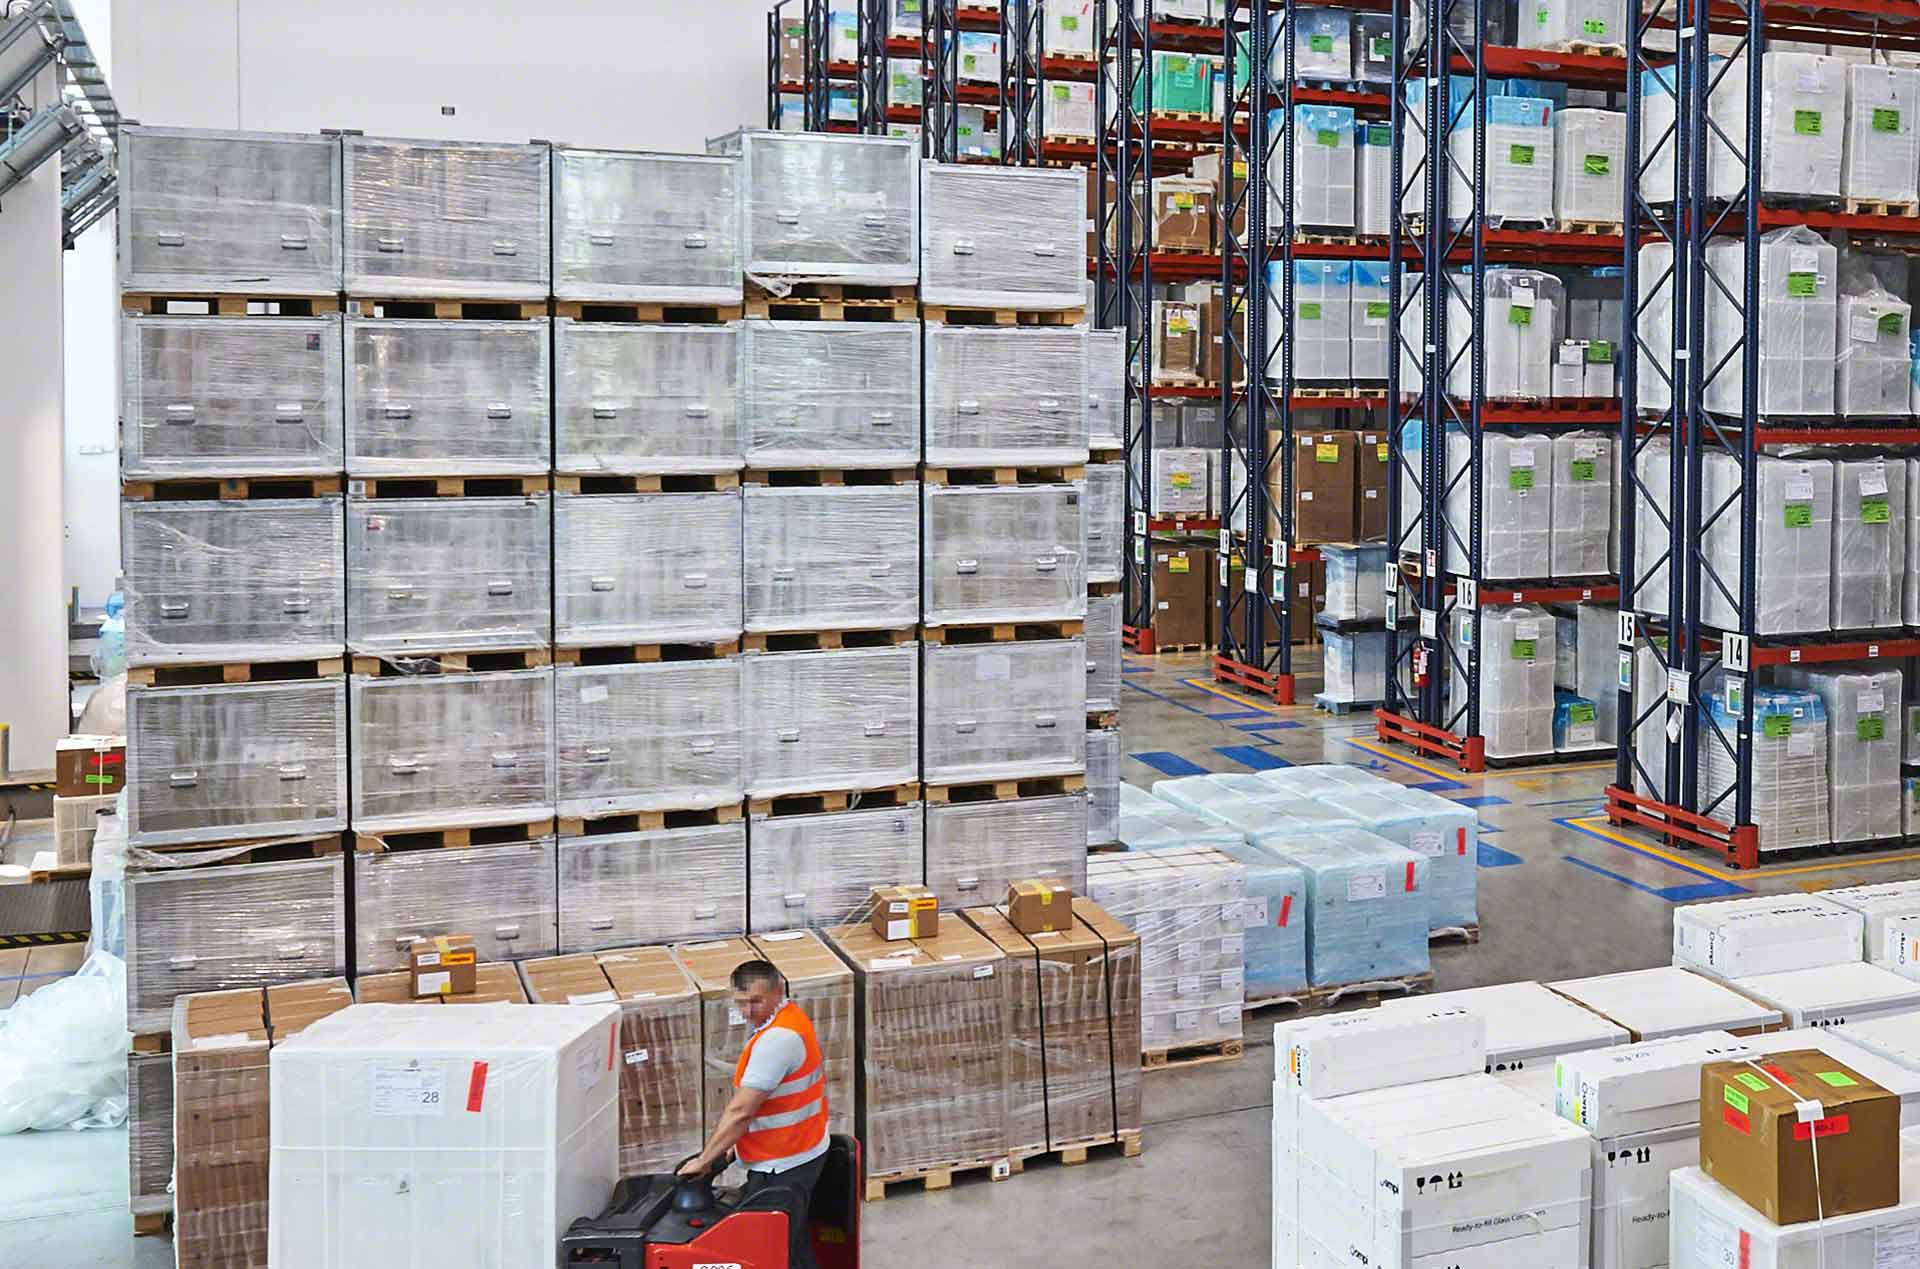 Block stacking consists of stacking goods on the floor of the warehouse